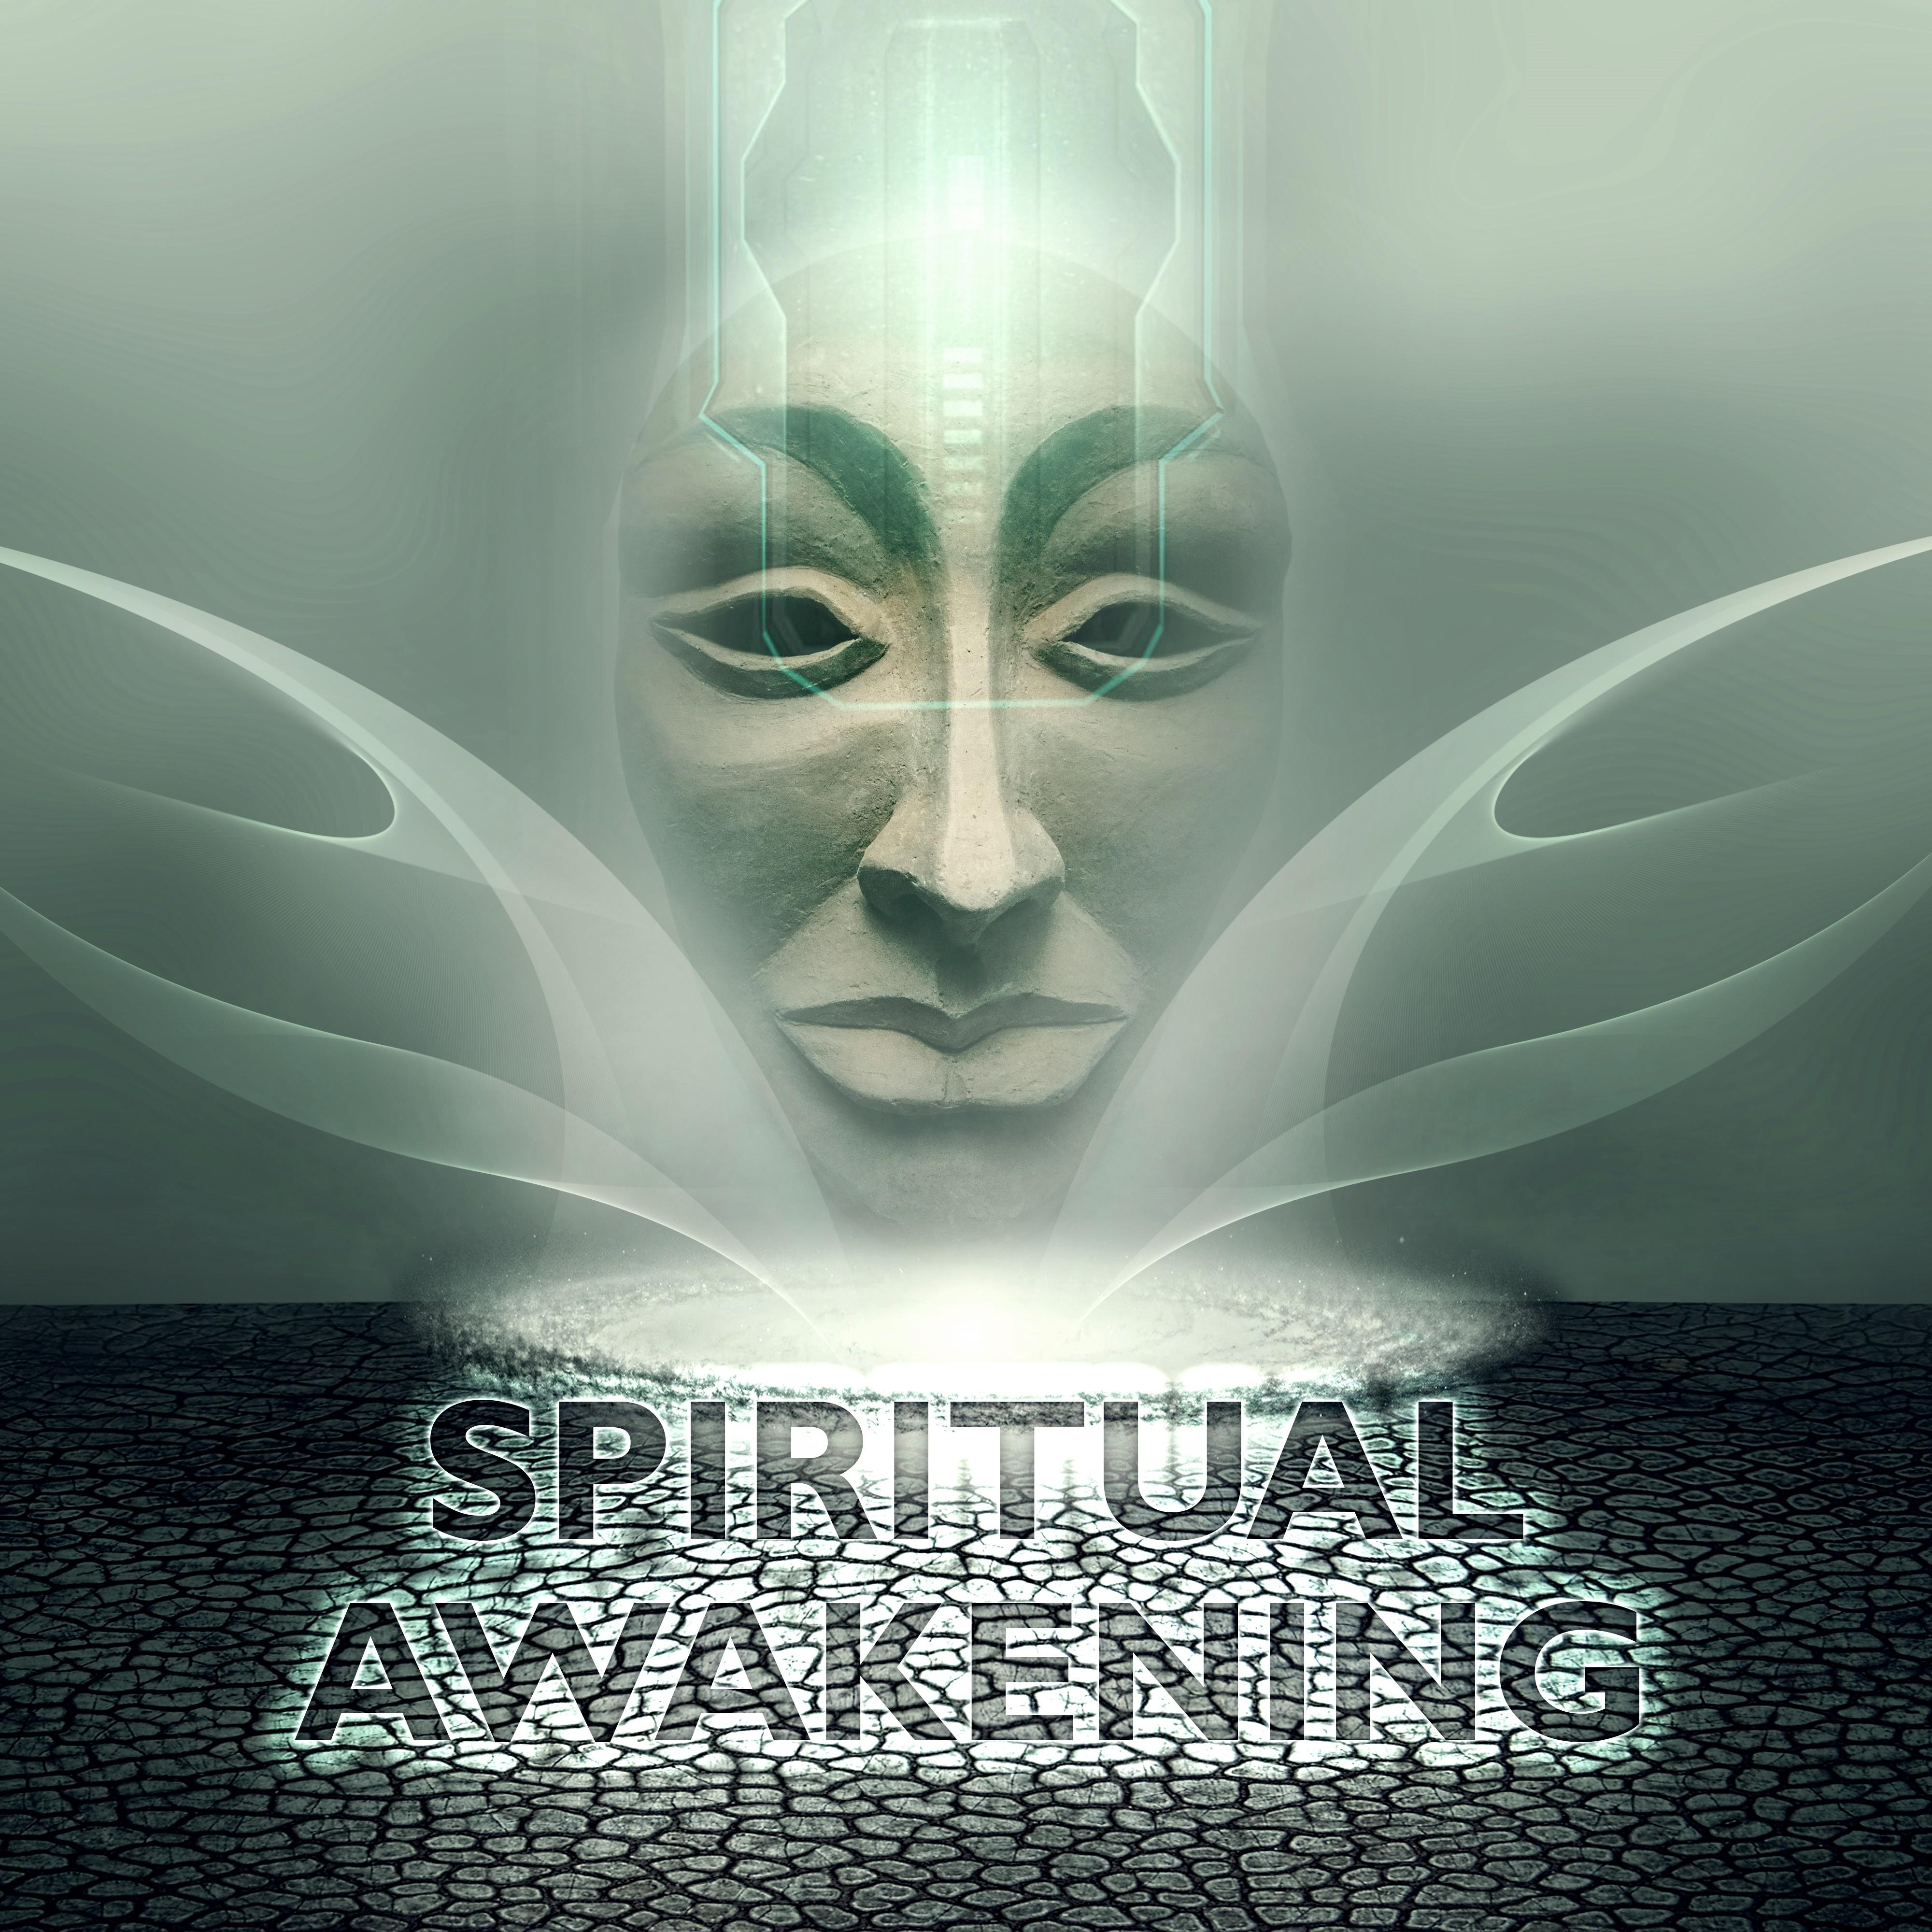 Spiritual Awakening - Mindfulness Meditation Spiritual Healing, Sounds of Nature for Namaste Yoga, Calming Music, Yoga for Beginners, Breathing Techniques for Stress Relief